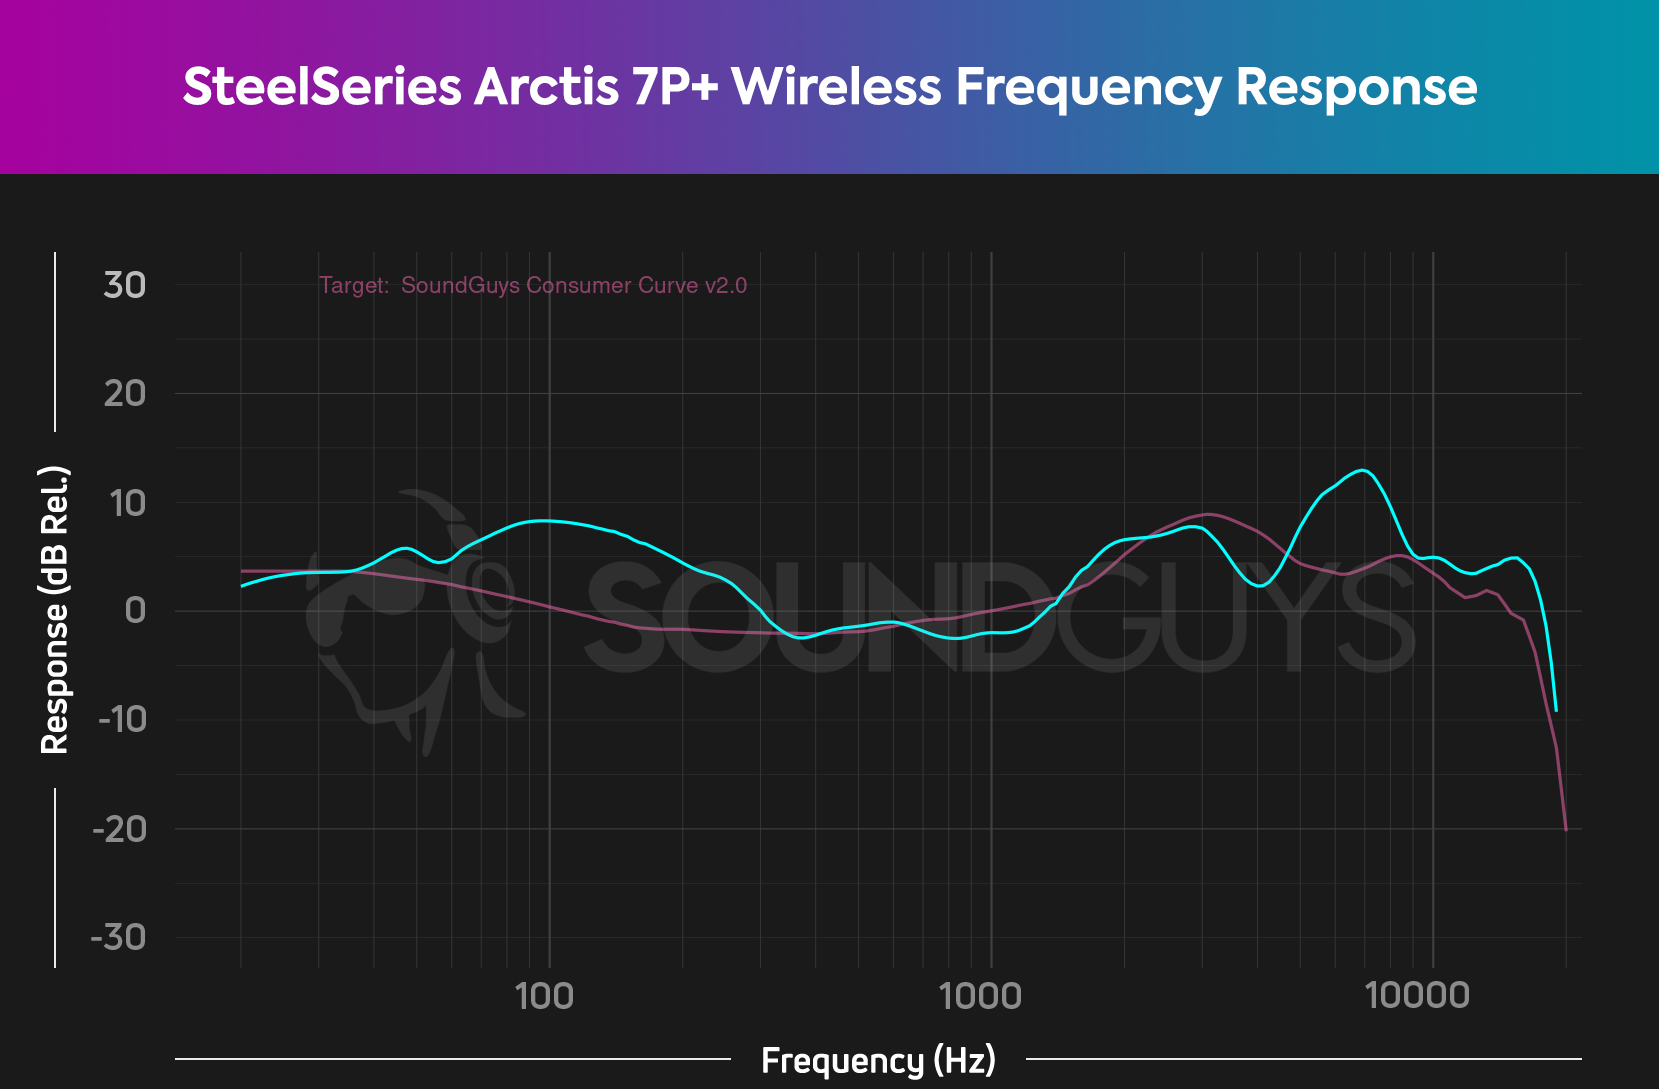 SteelSeries 7P+ Wireless frequency response graph showing emphasized bass and high end.